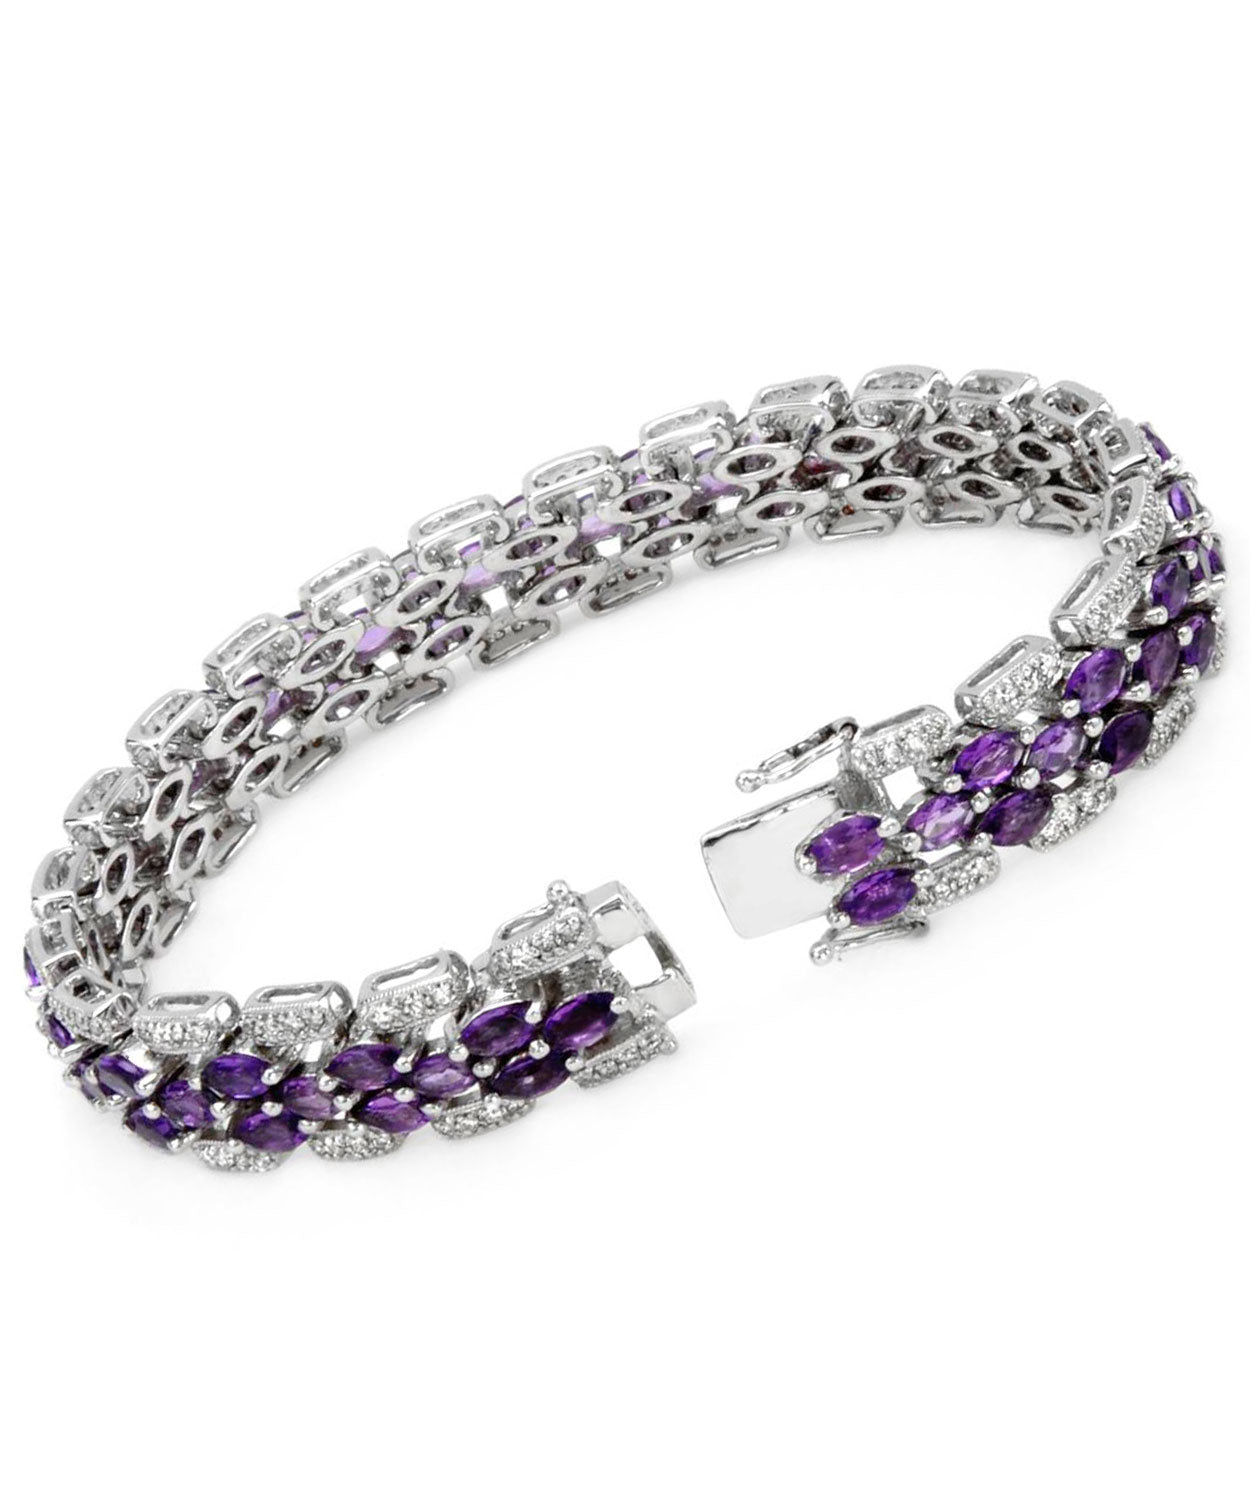 Allure Collection 9.94 ctw Natural Amethyst and Diamond 14k Gold Statement Link Bracelet View 2